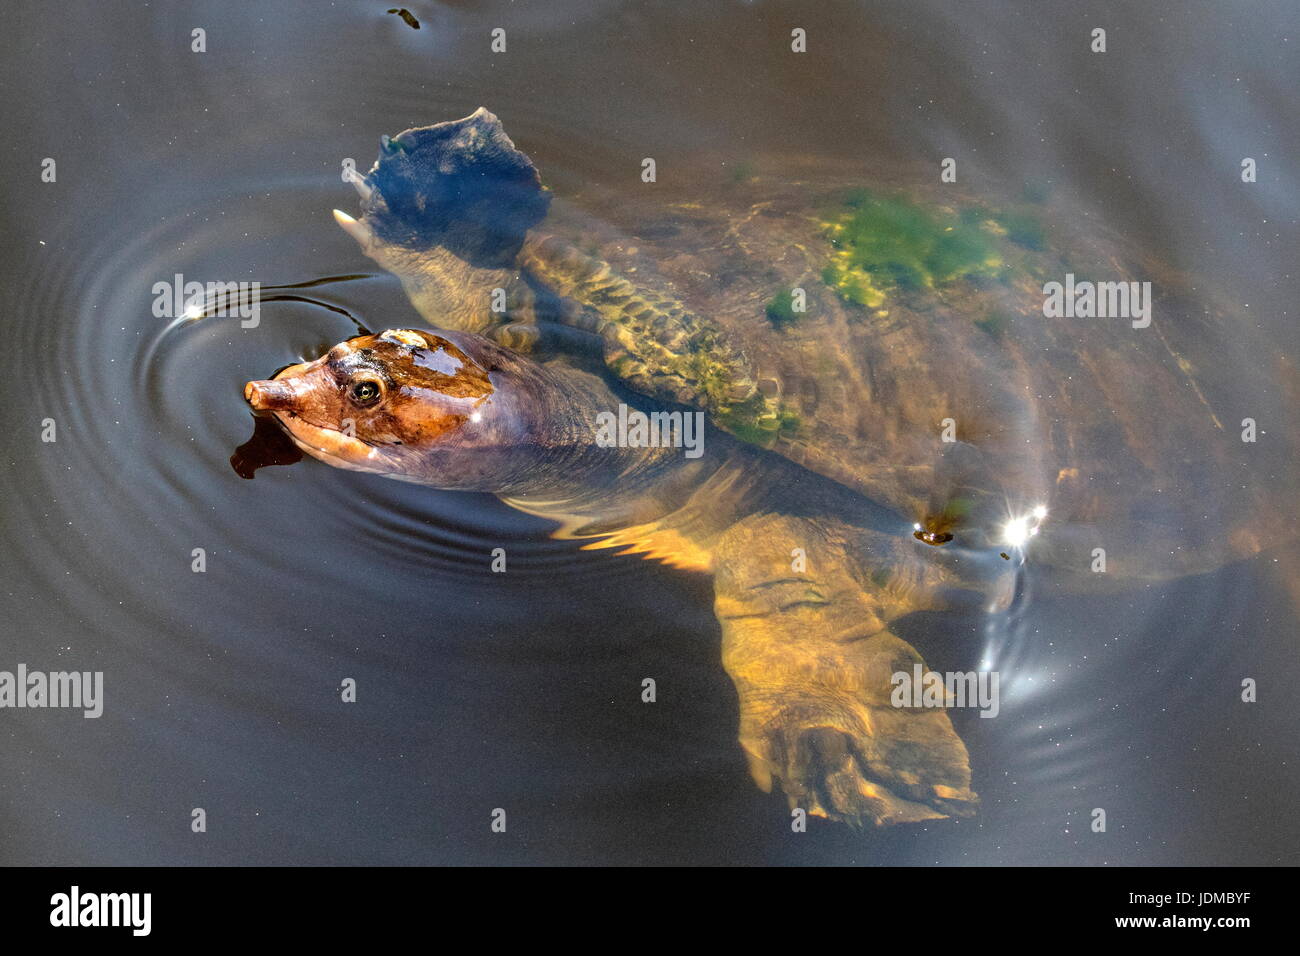 A Florida softshell turtle, Apalone ferox, on the surface of the water. Stock Photo